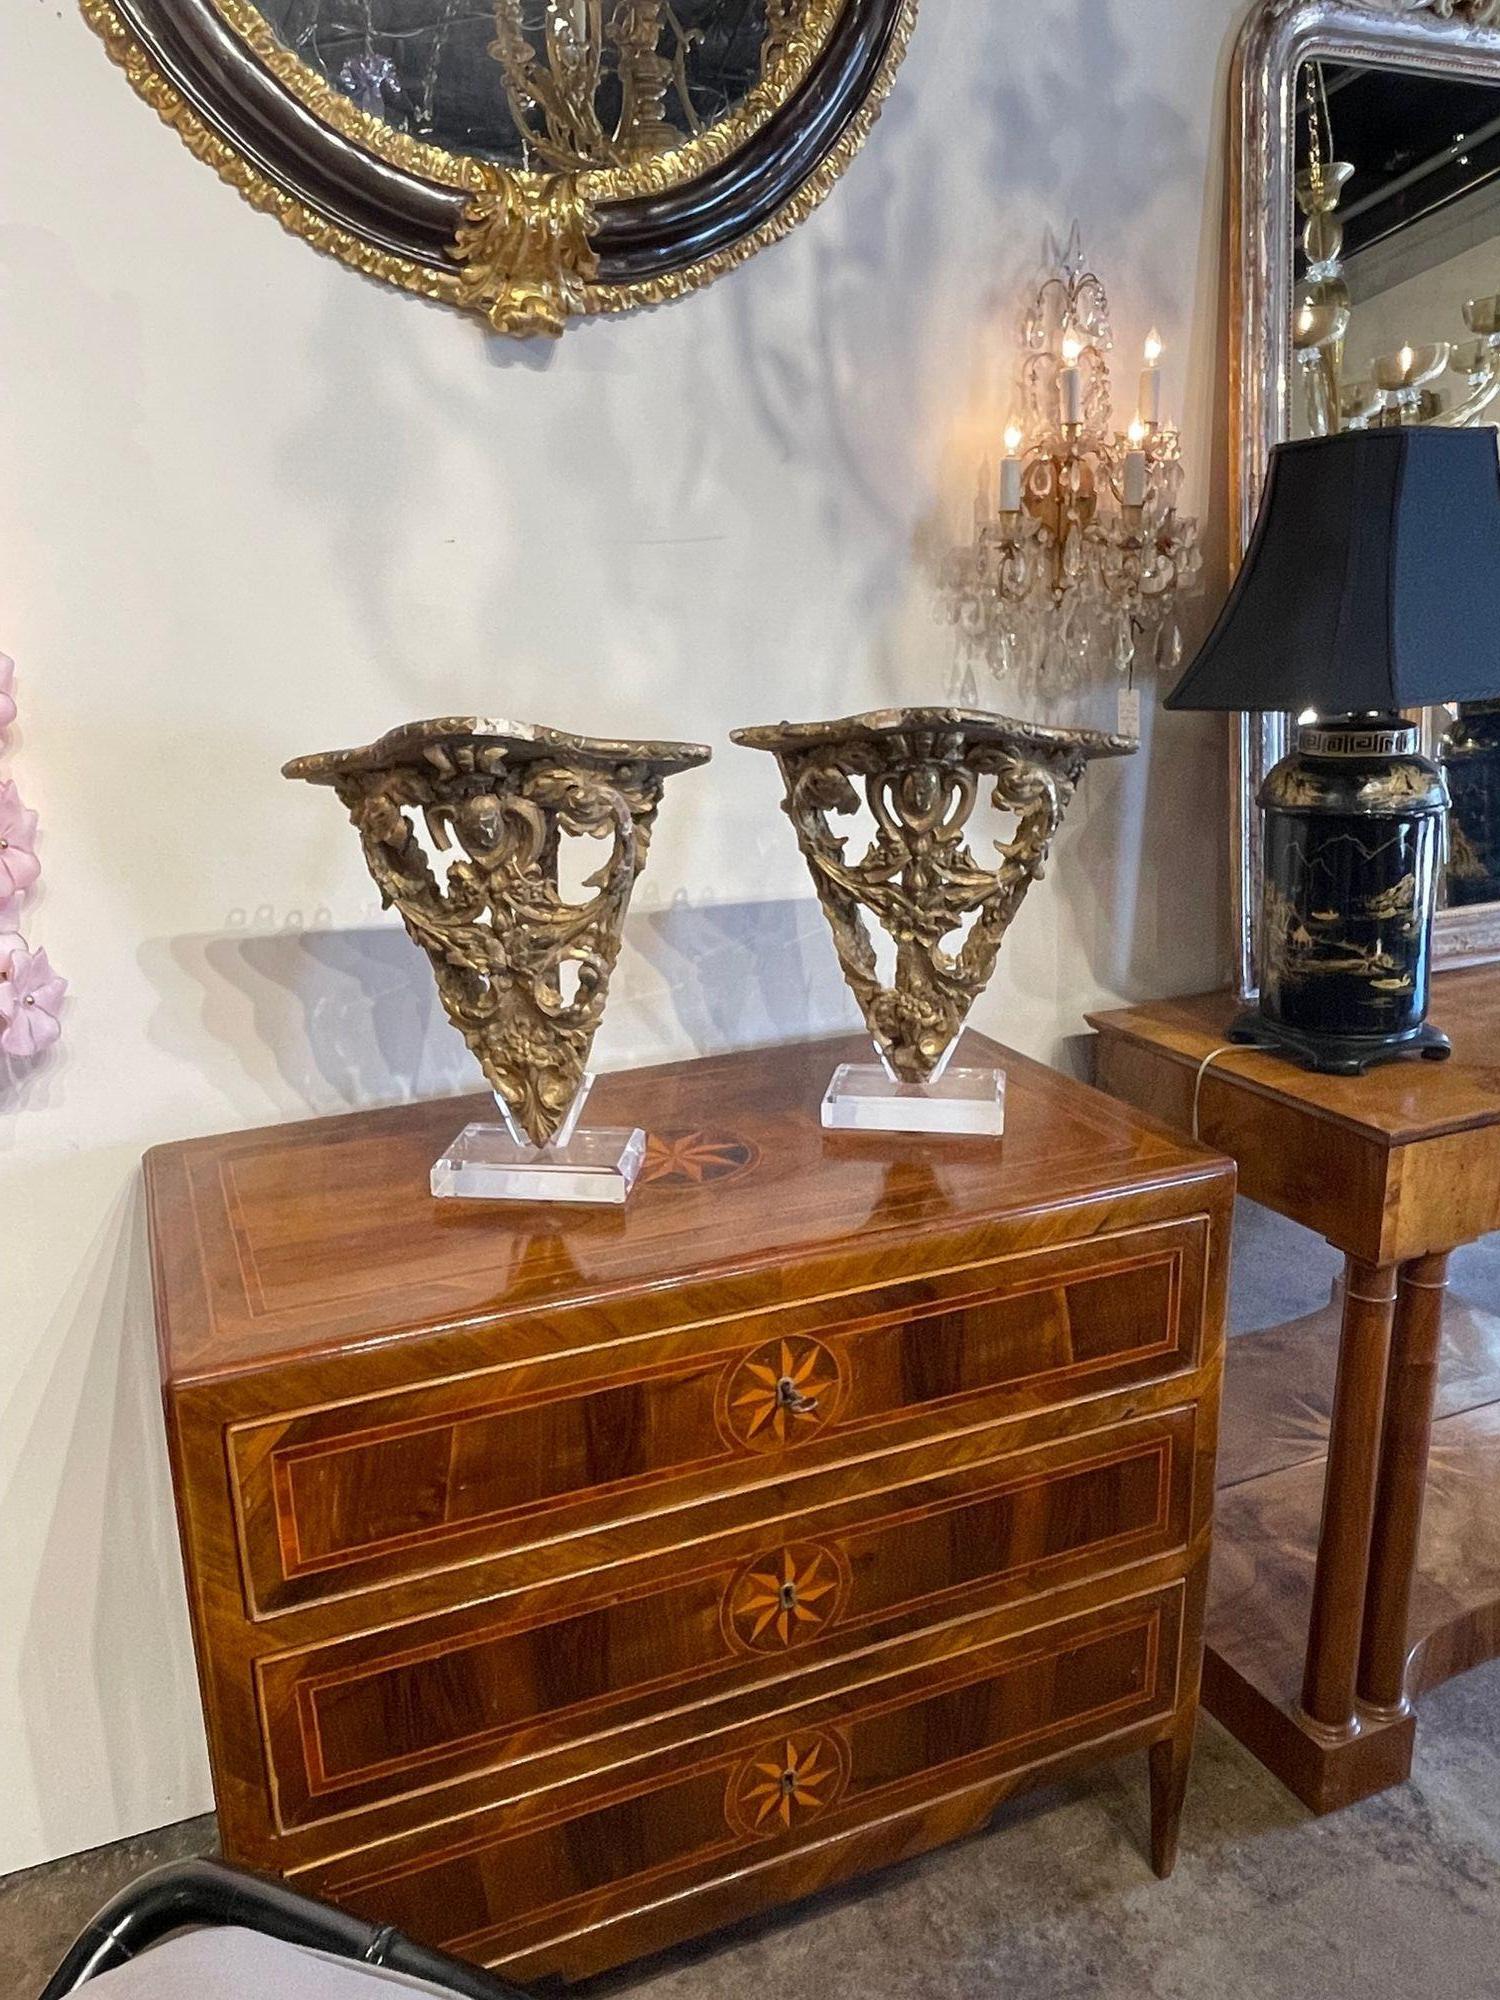 Decorative pair of 18th century Italian carved and giltwood corner brackets on mounted lucite stands. Fabulous accessories that make a real impact!